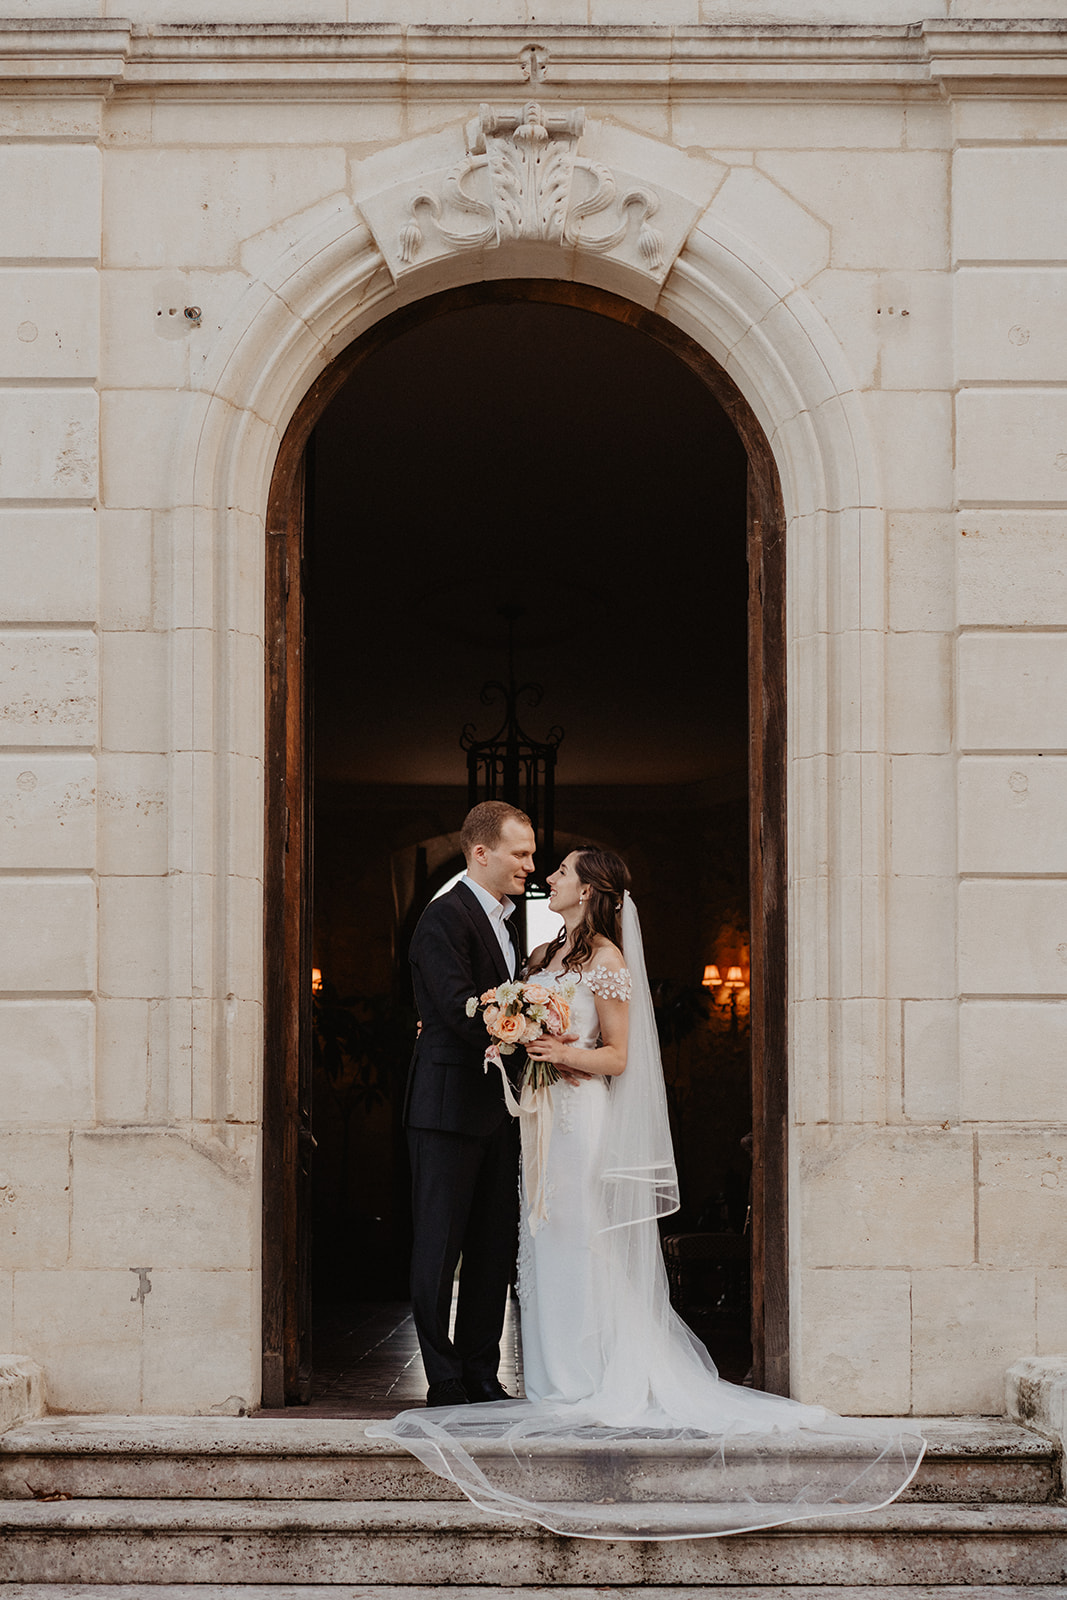 French wedding photos and video duo Bordeaux couple session